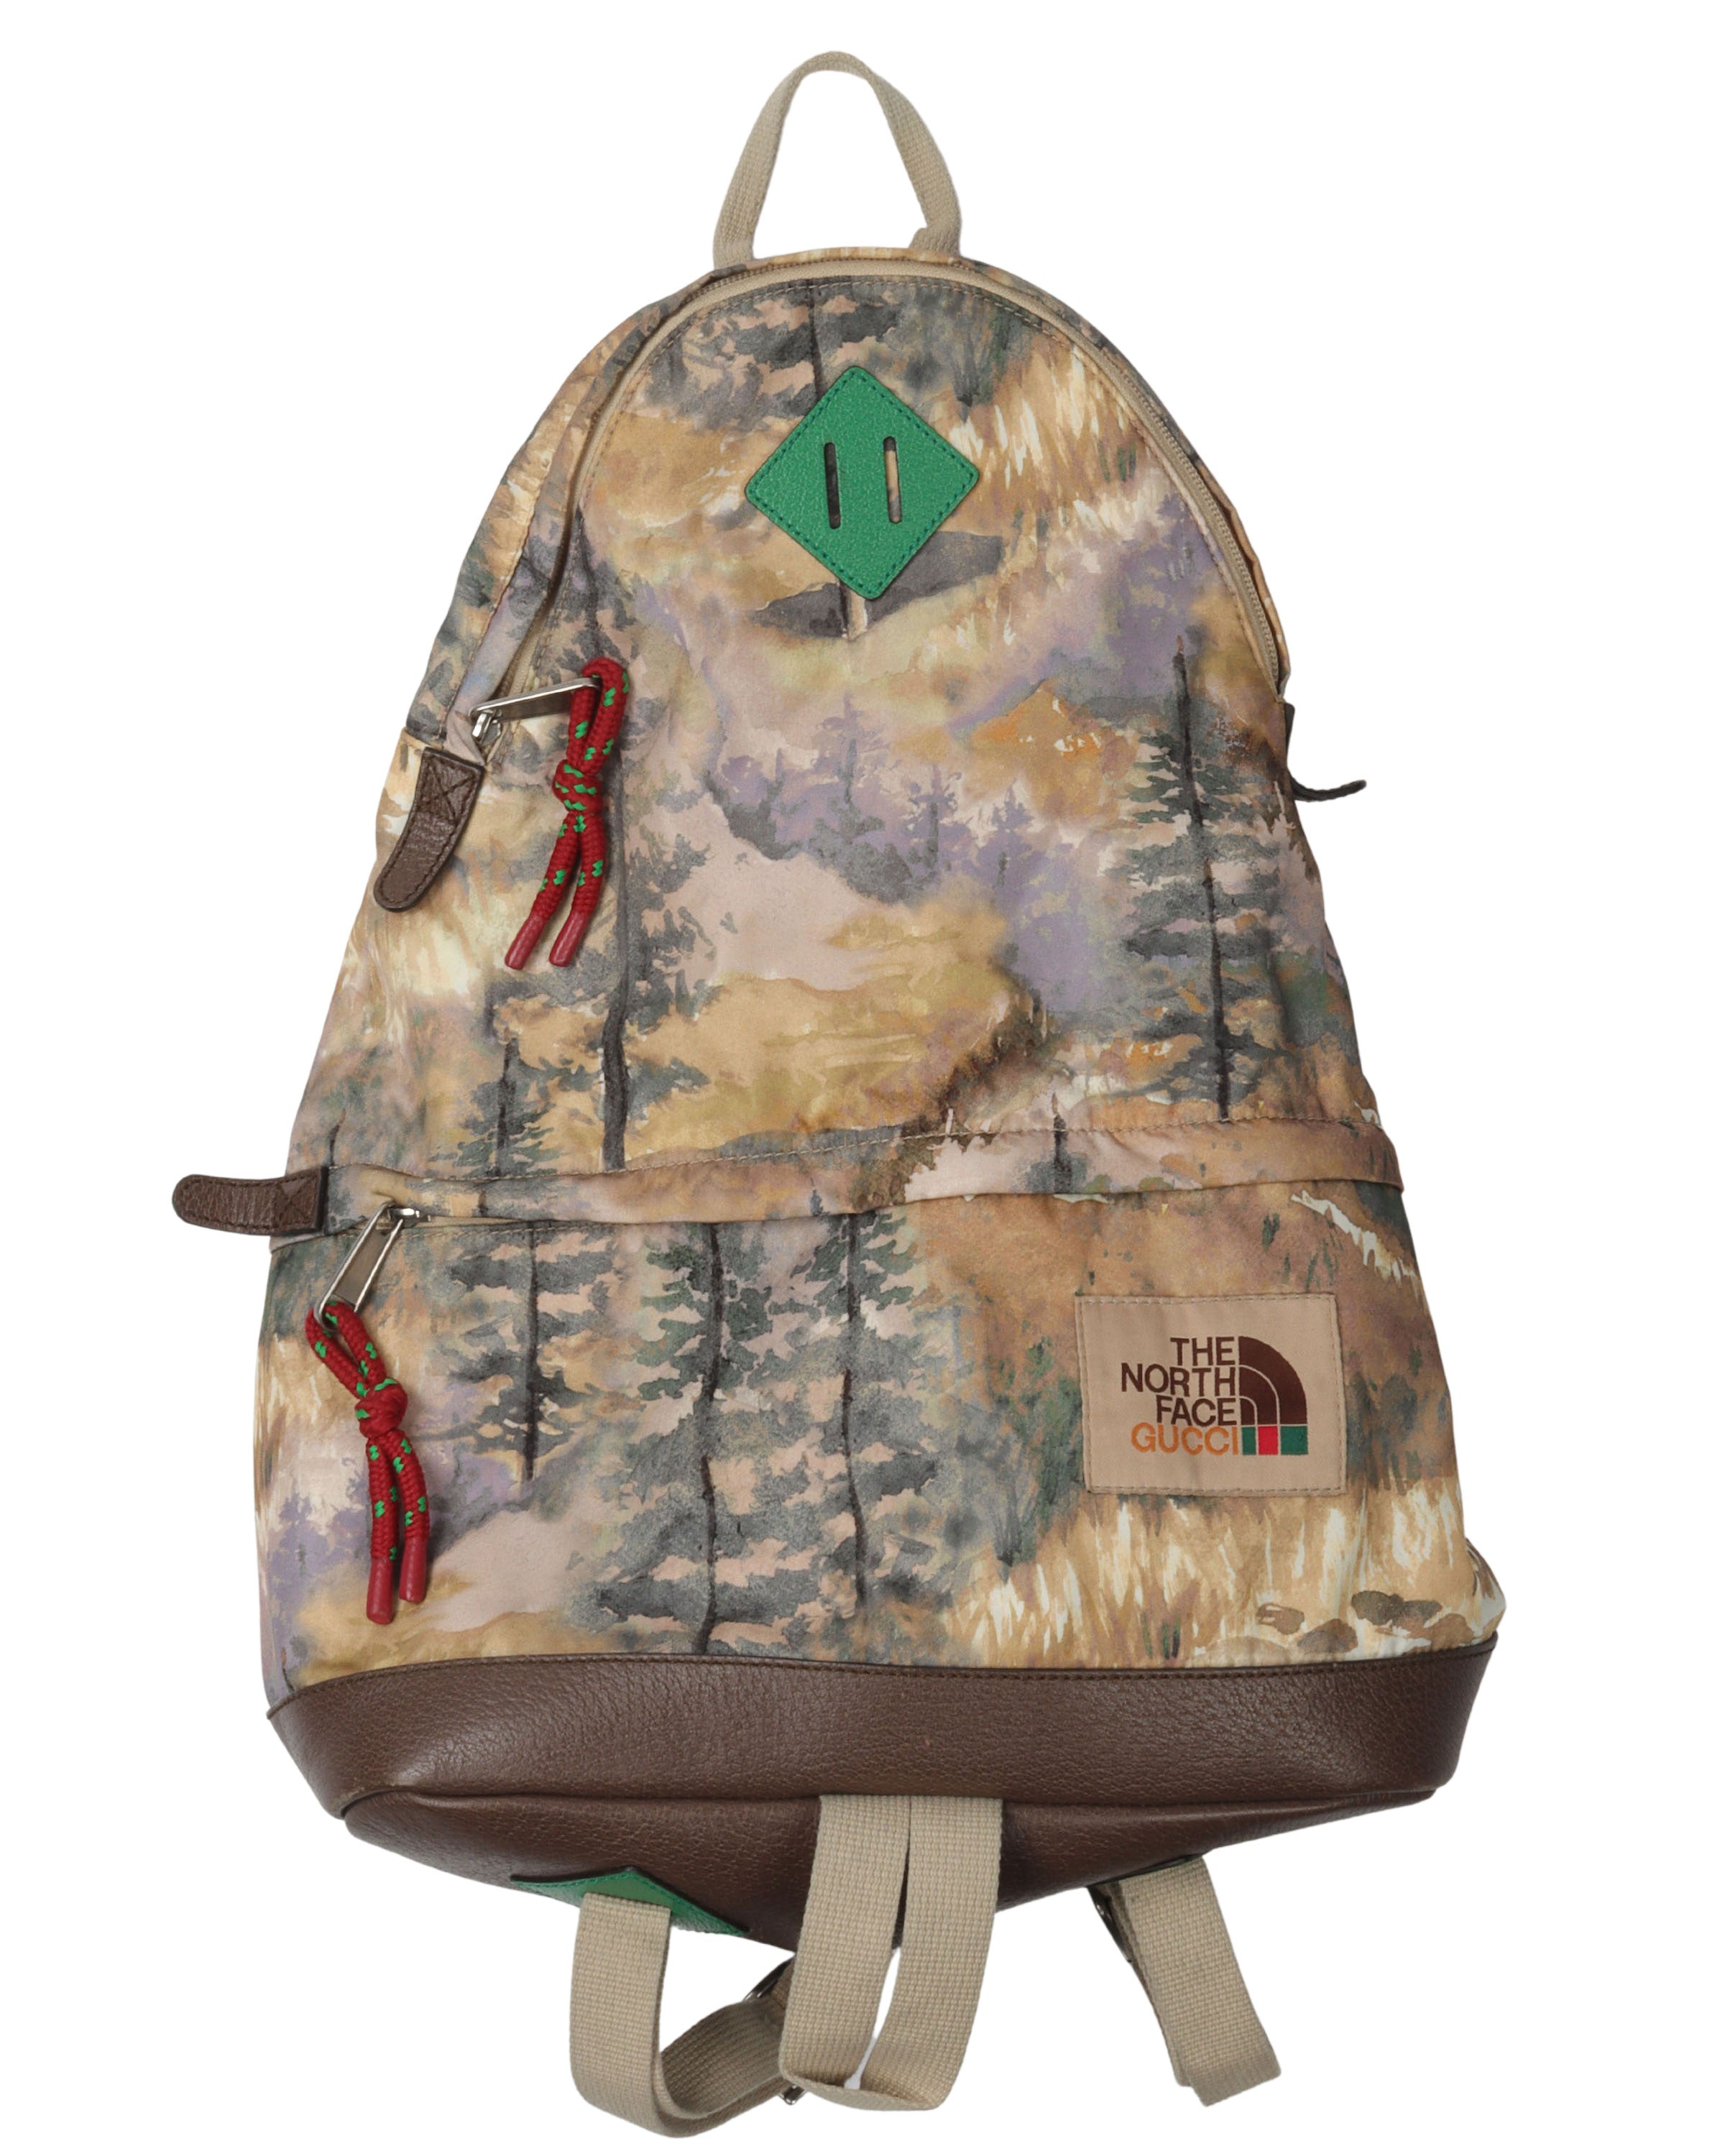 The North Face Print Backpack